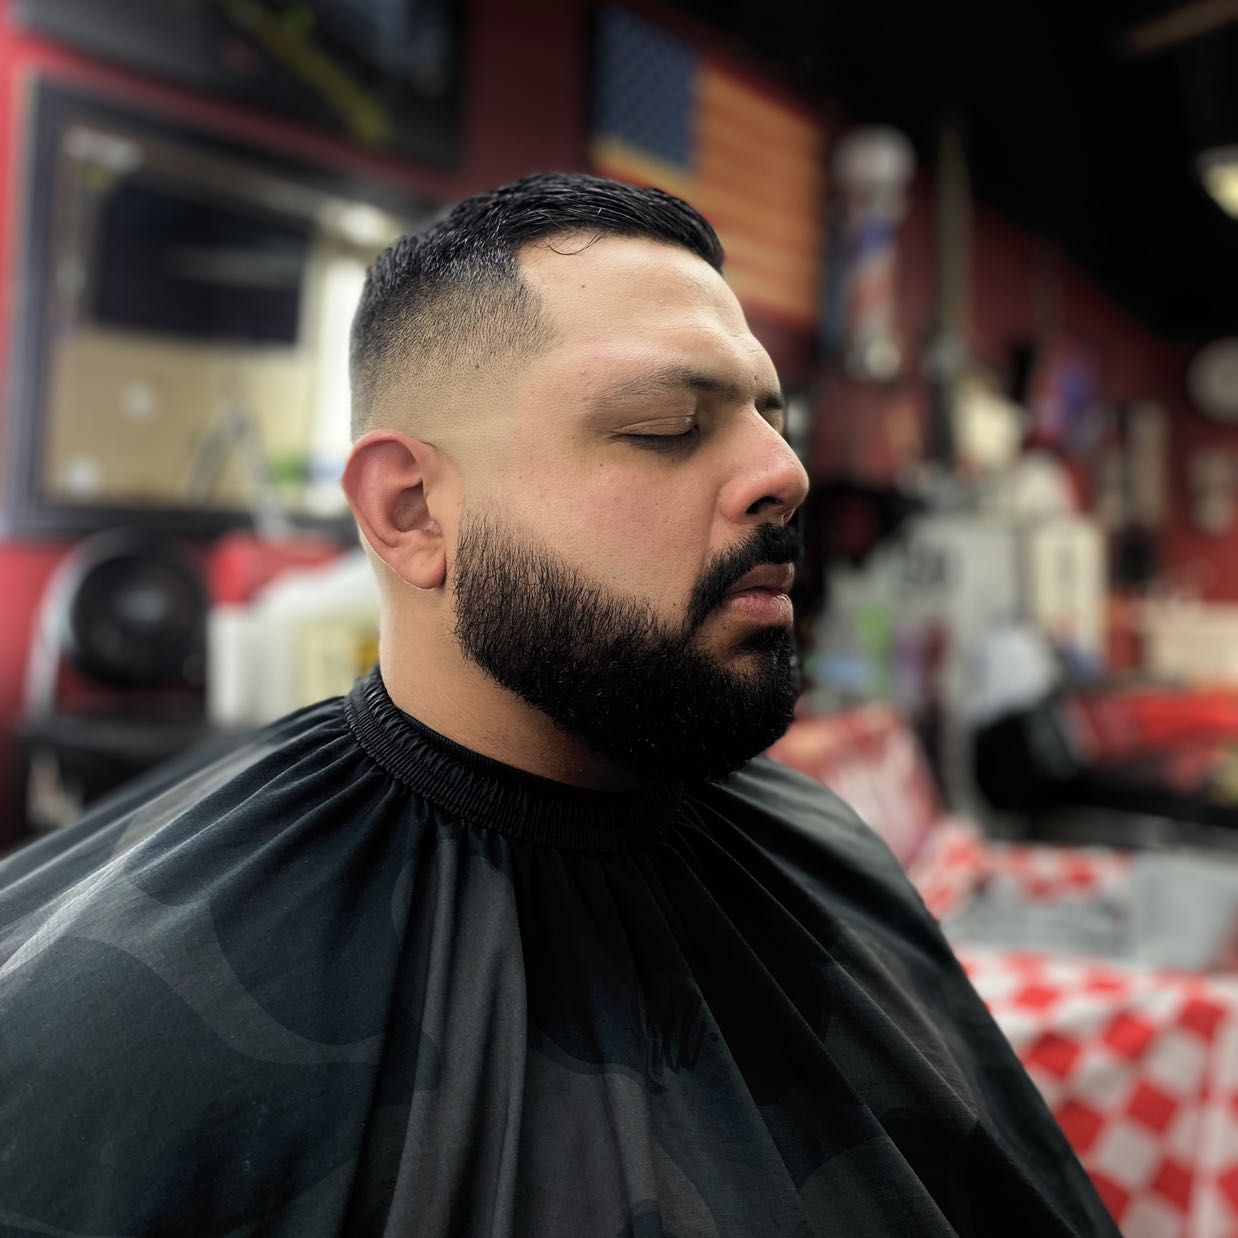 Sal The Barber - Orange - Book Online - Prices, Reviews, Photos